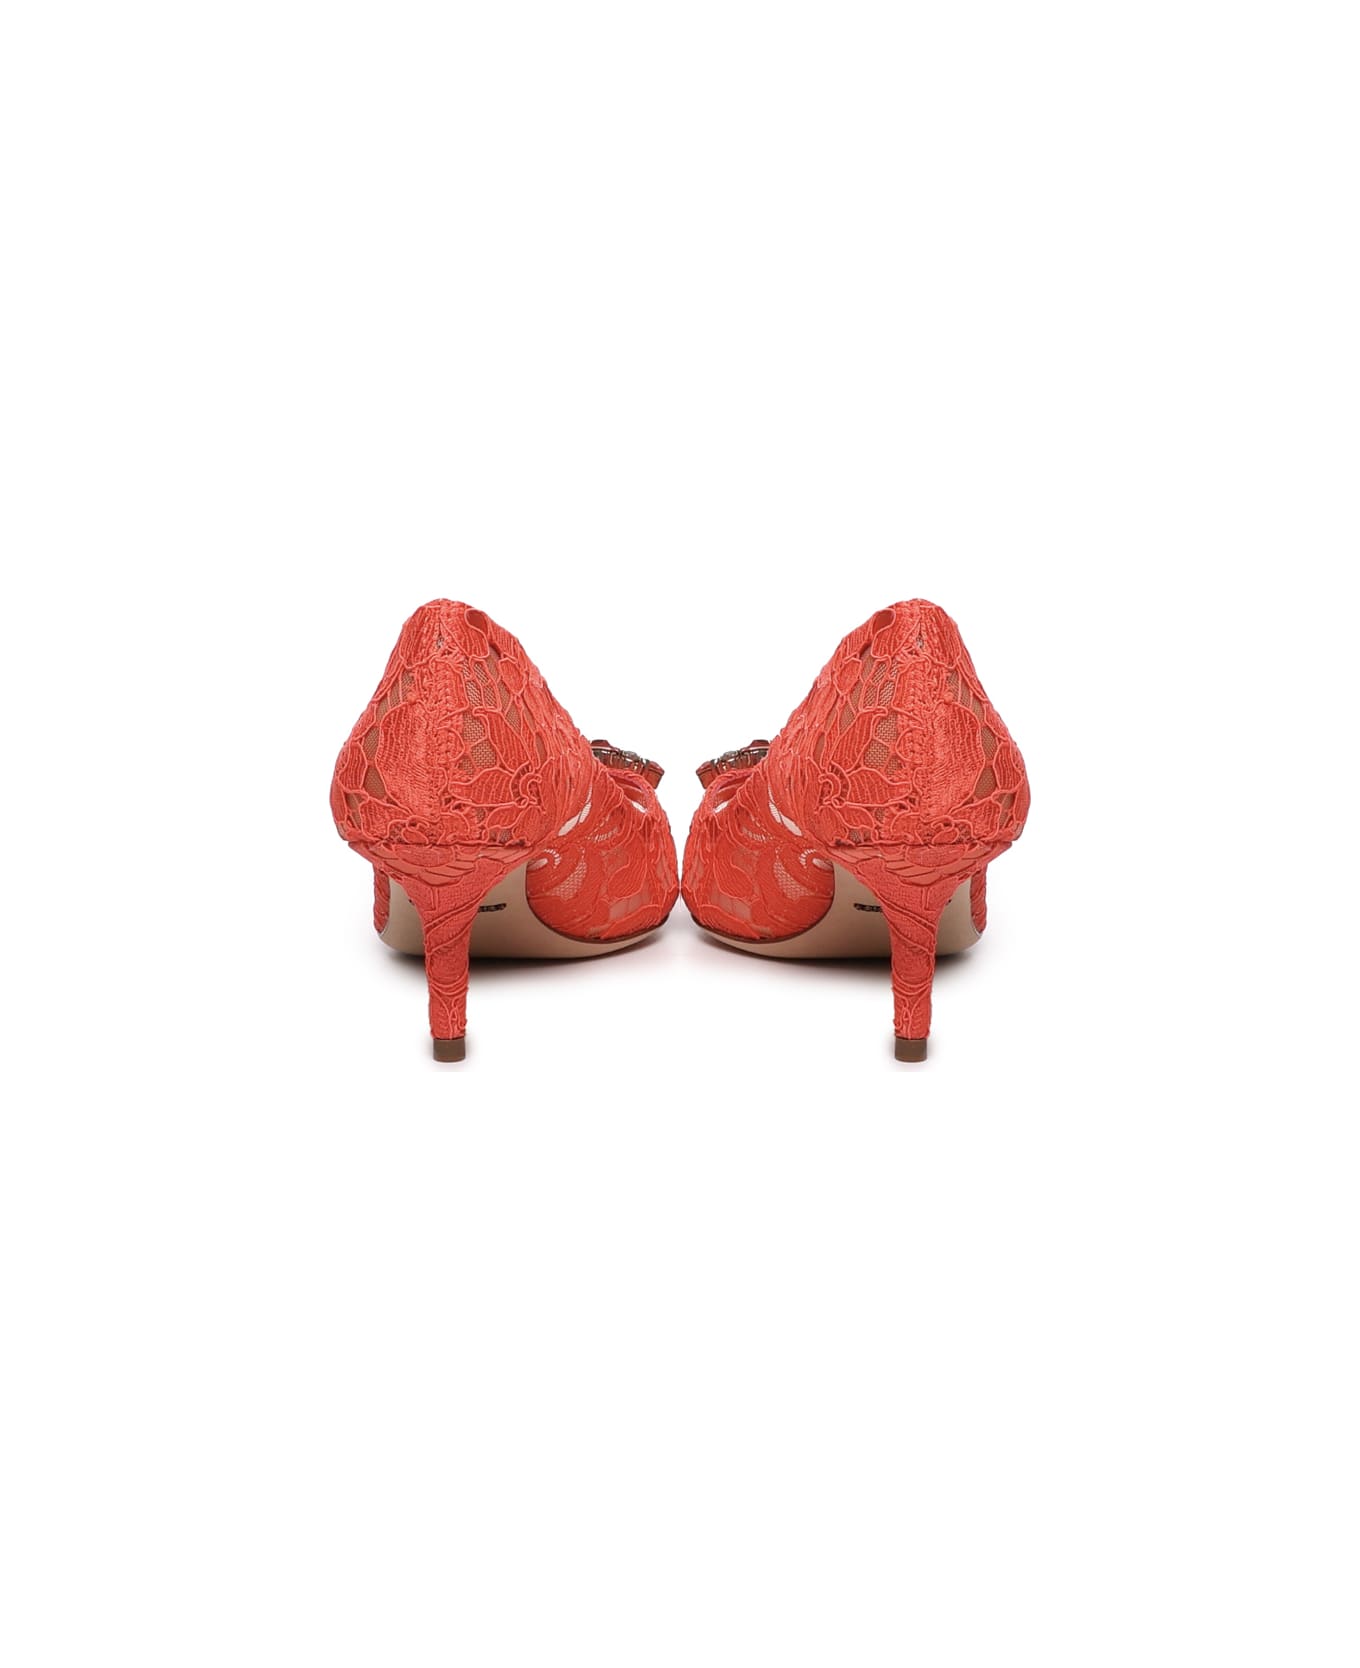 Dolce & Gabbana Taormina Lace Pumps With Crystals - Coral